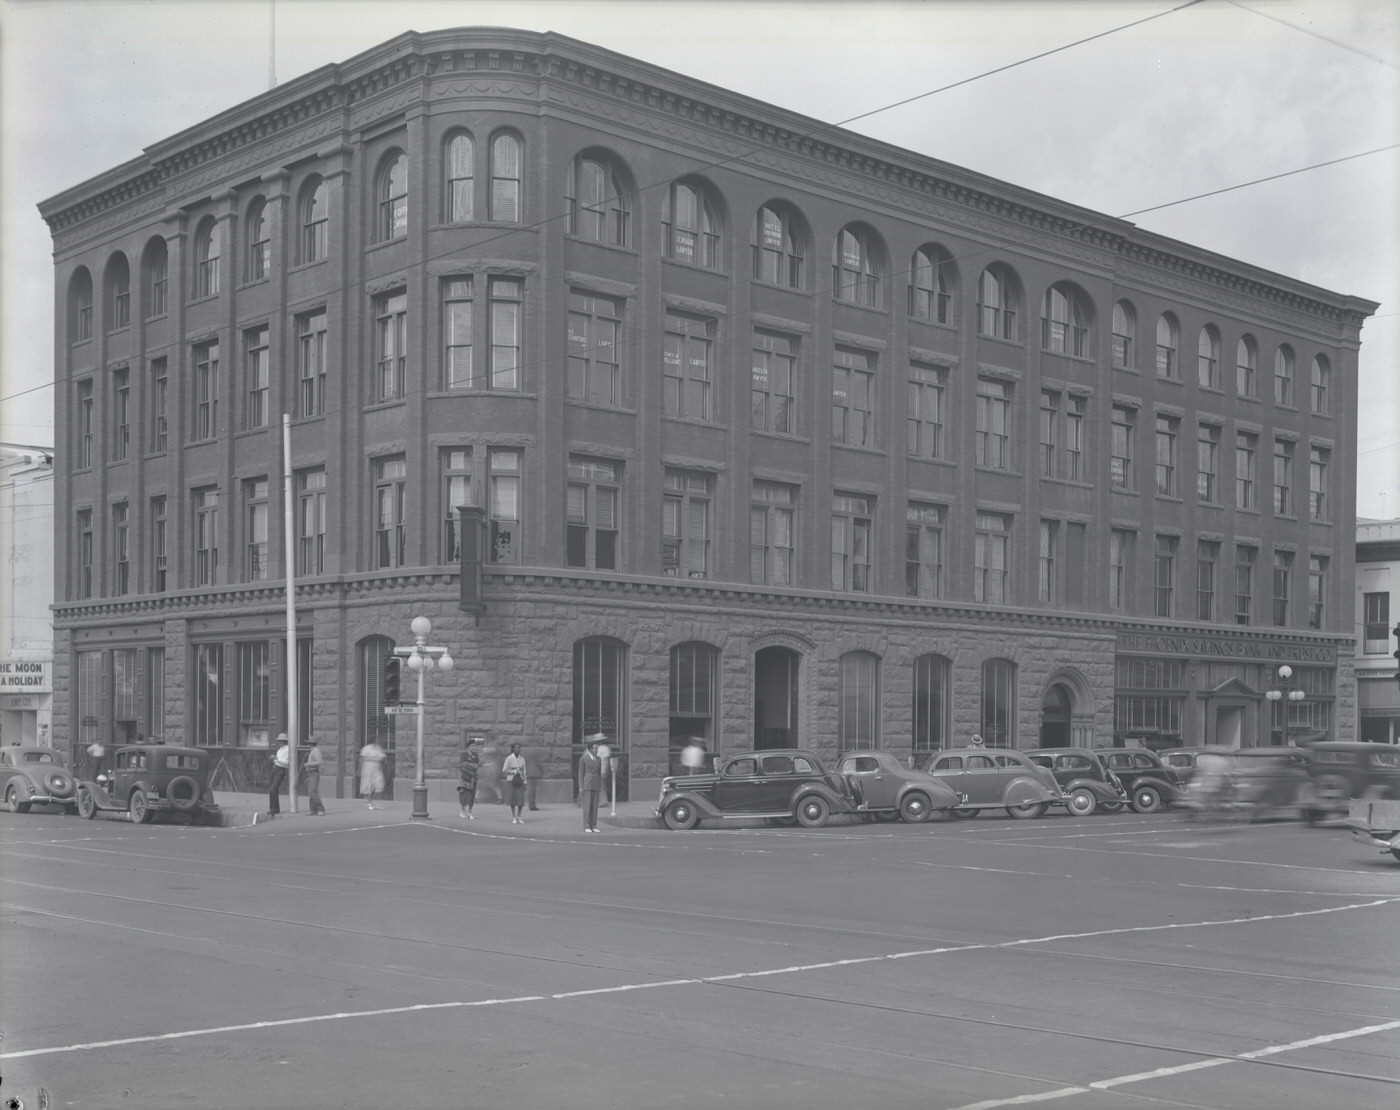 Fleming Building, 1930s. This building stood on the northwest corner of First Ave. and Washington St. in Phoenix and housed the "Phoenix National Bank."